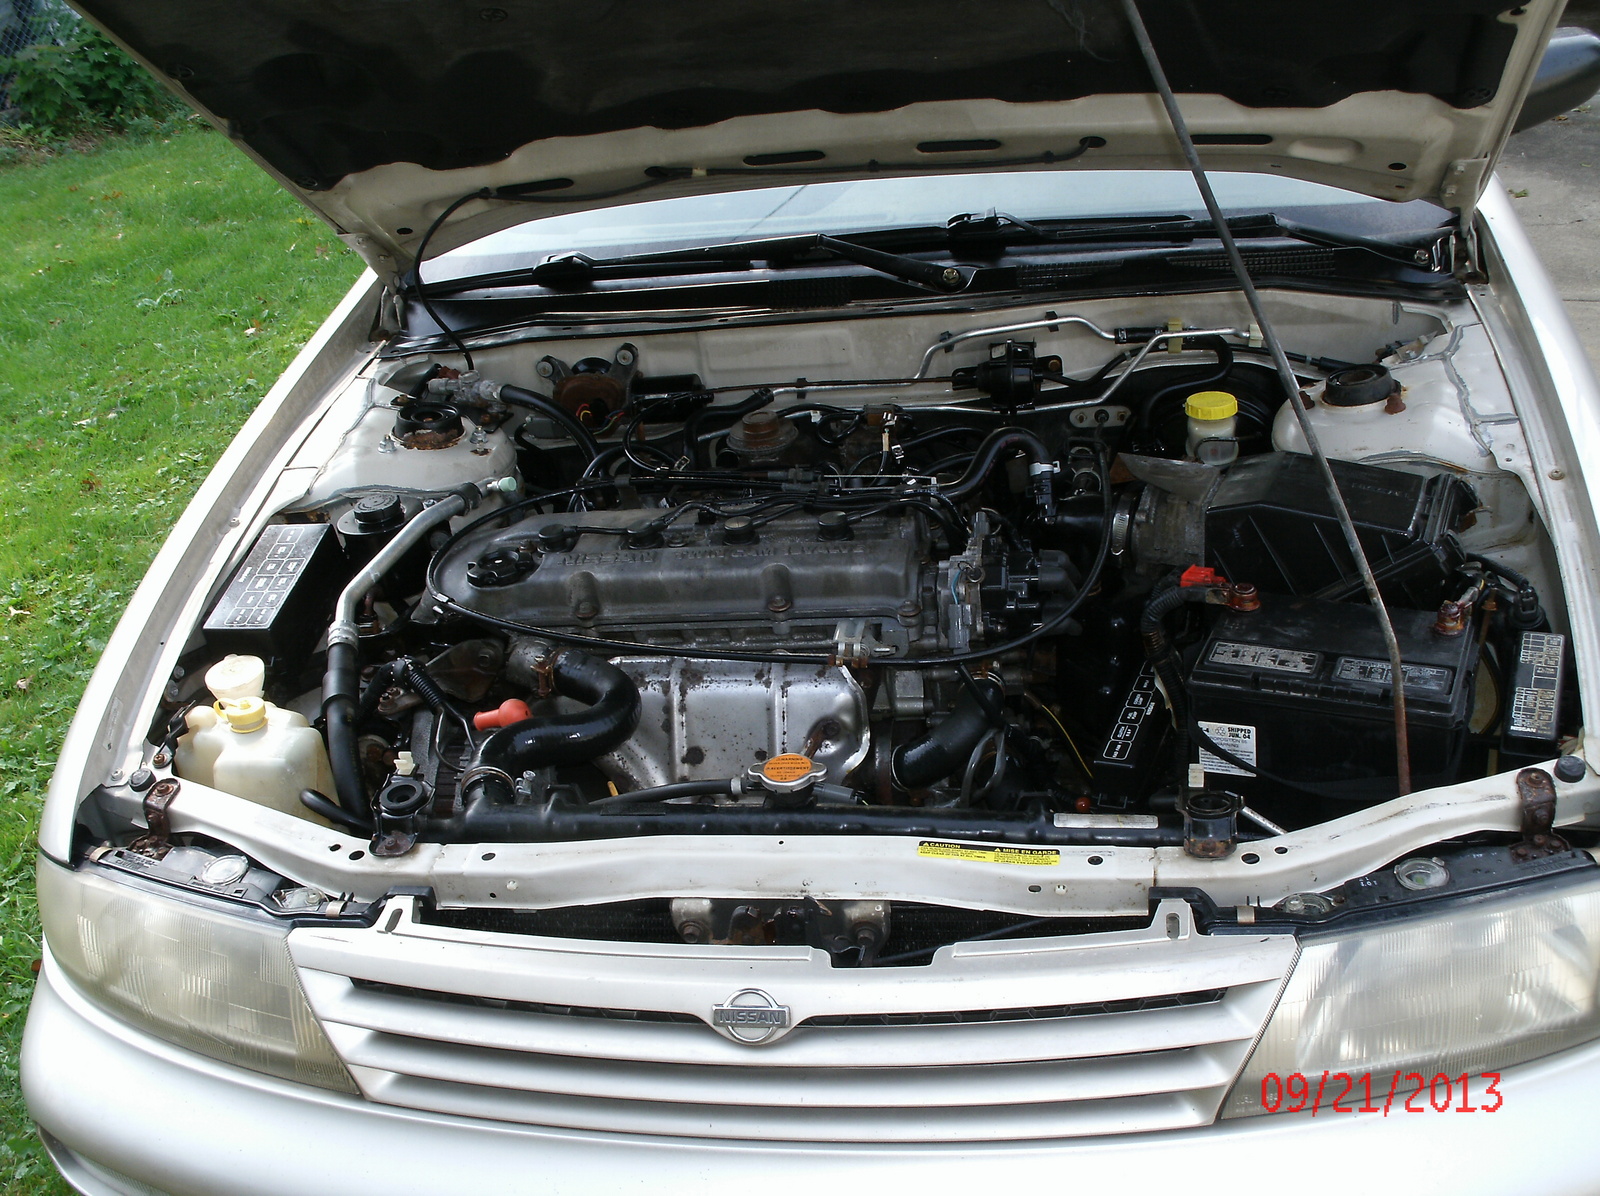 1997 Nissan altima engine removal #8